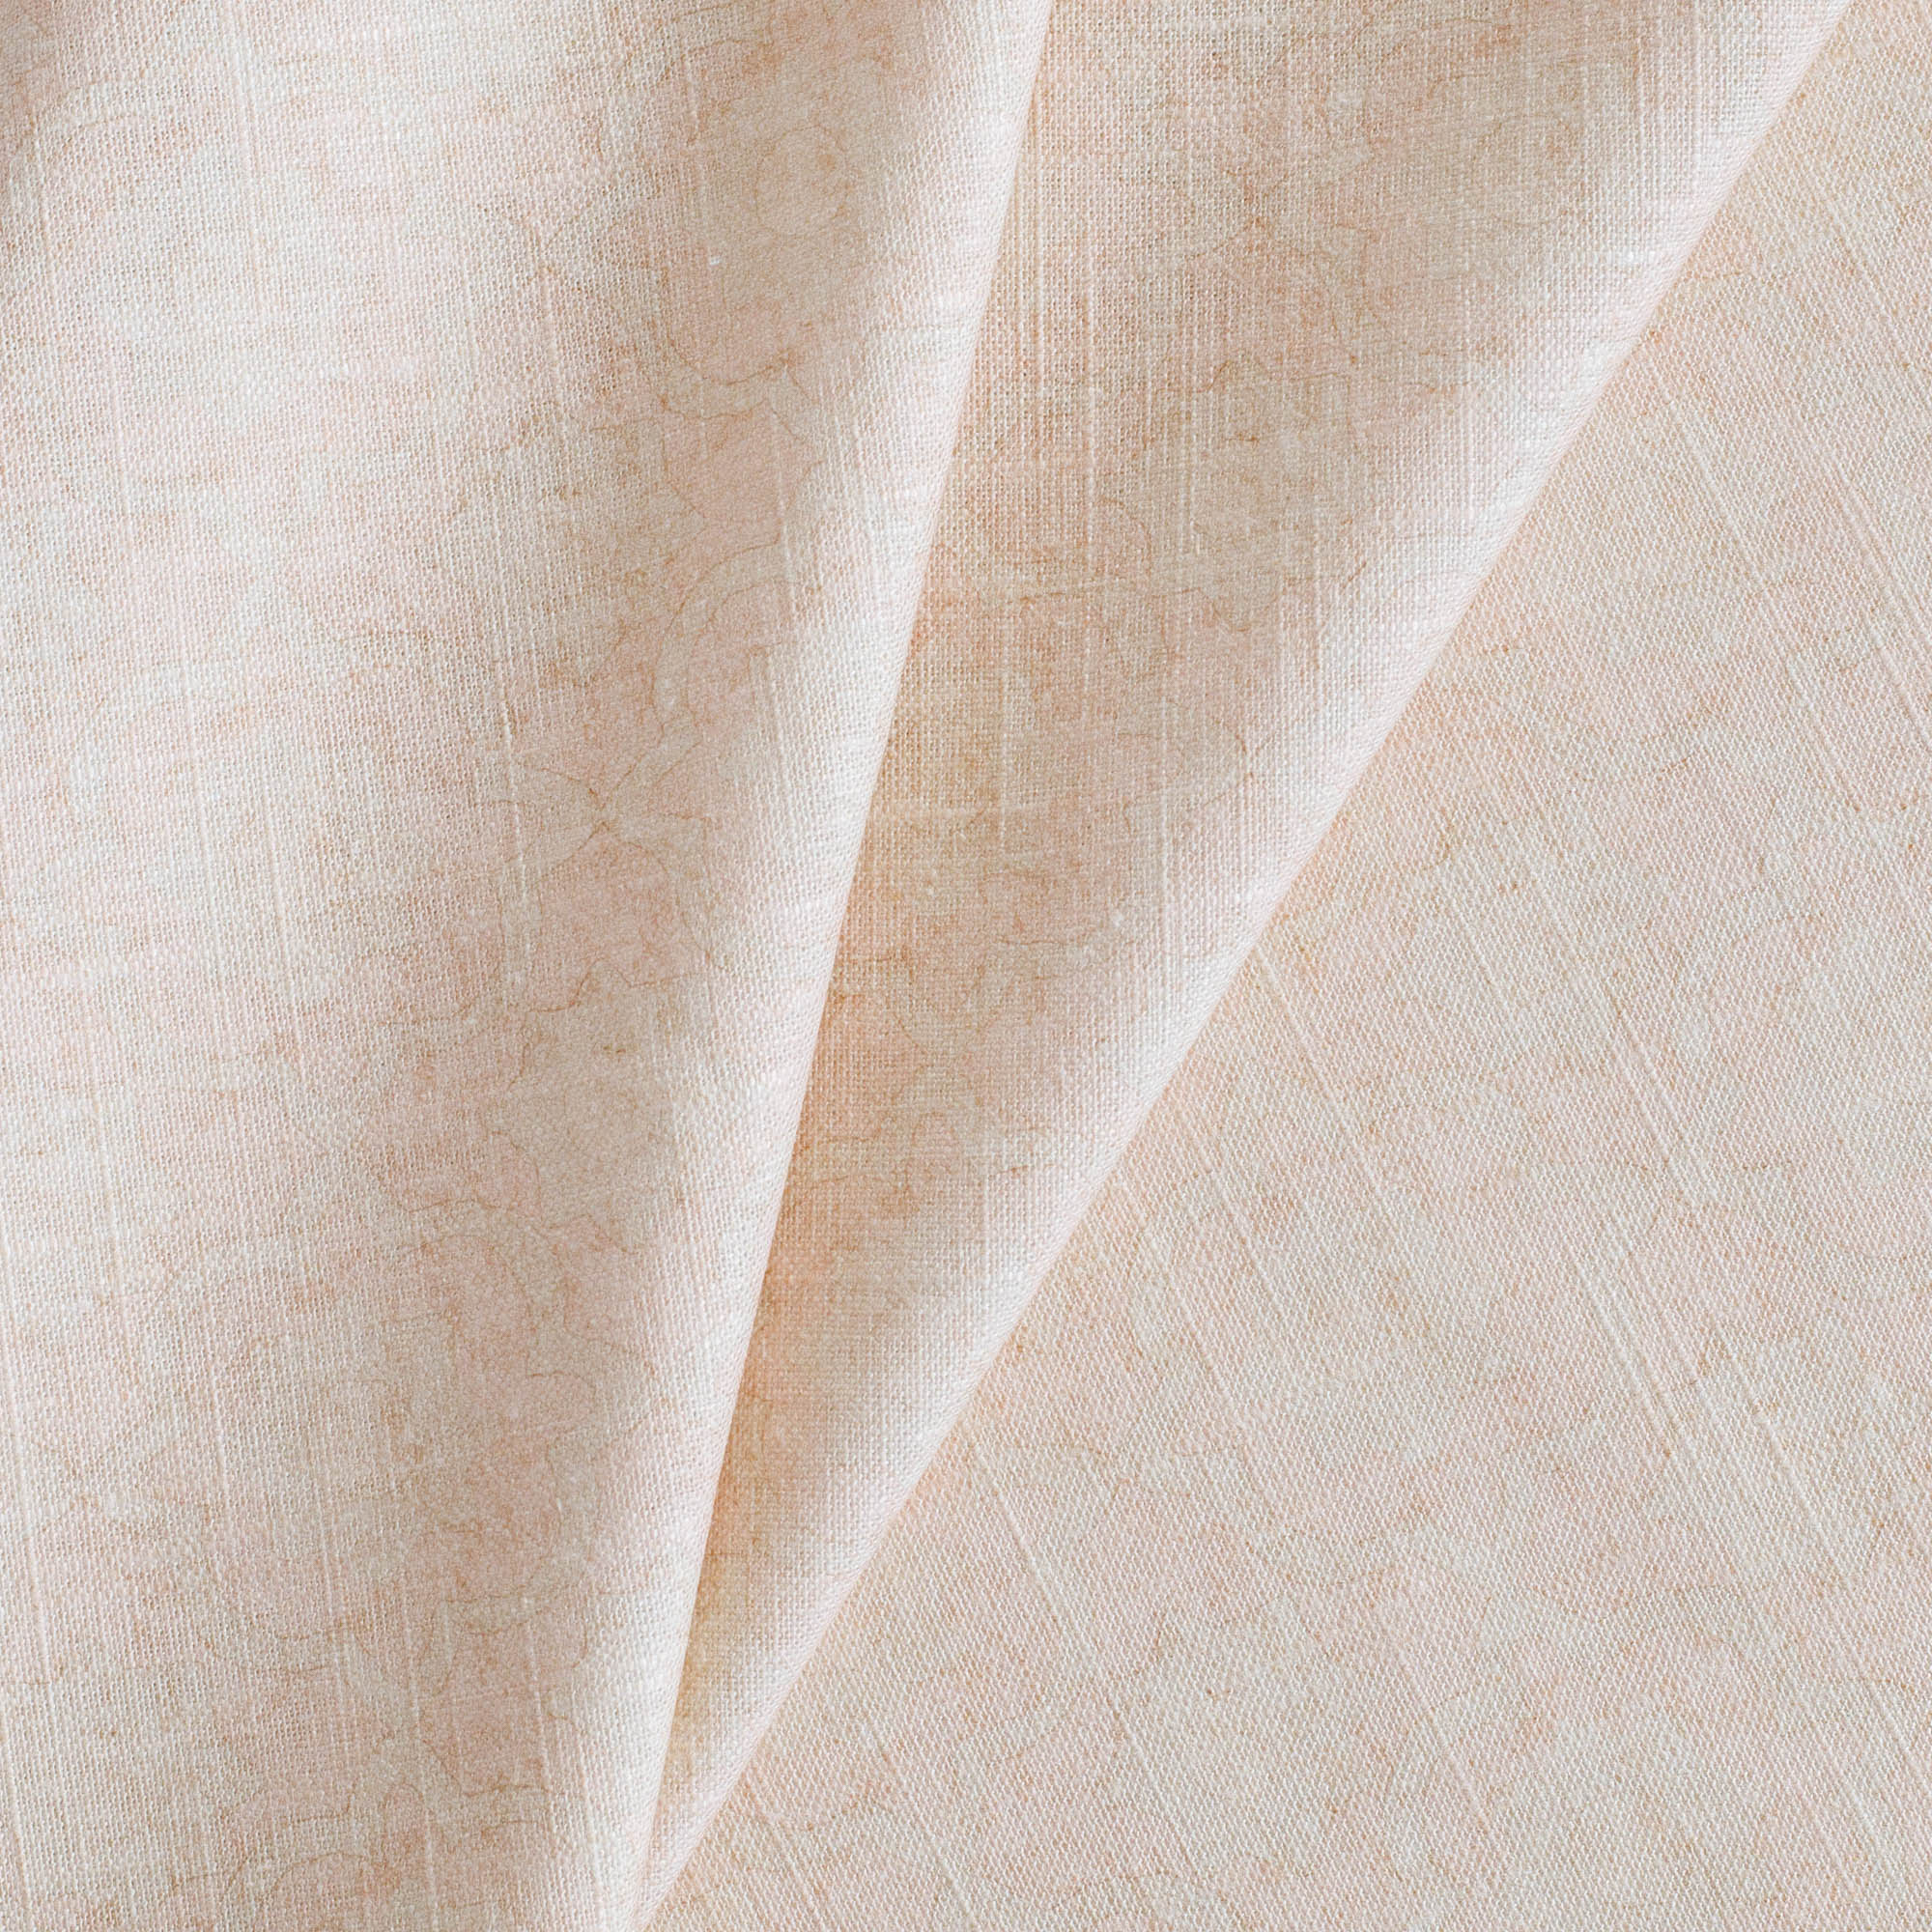 Alia Fabric Blush, a soft pink subtle medallion pattern from Tonic Living